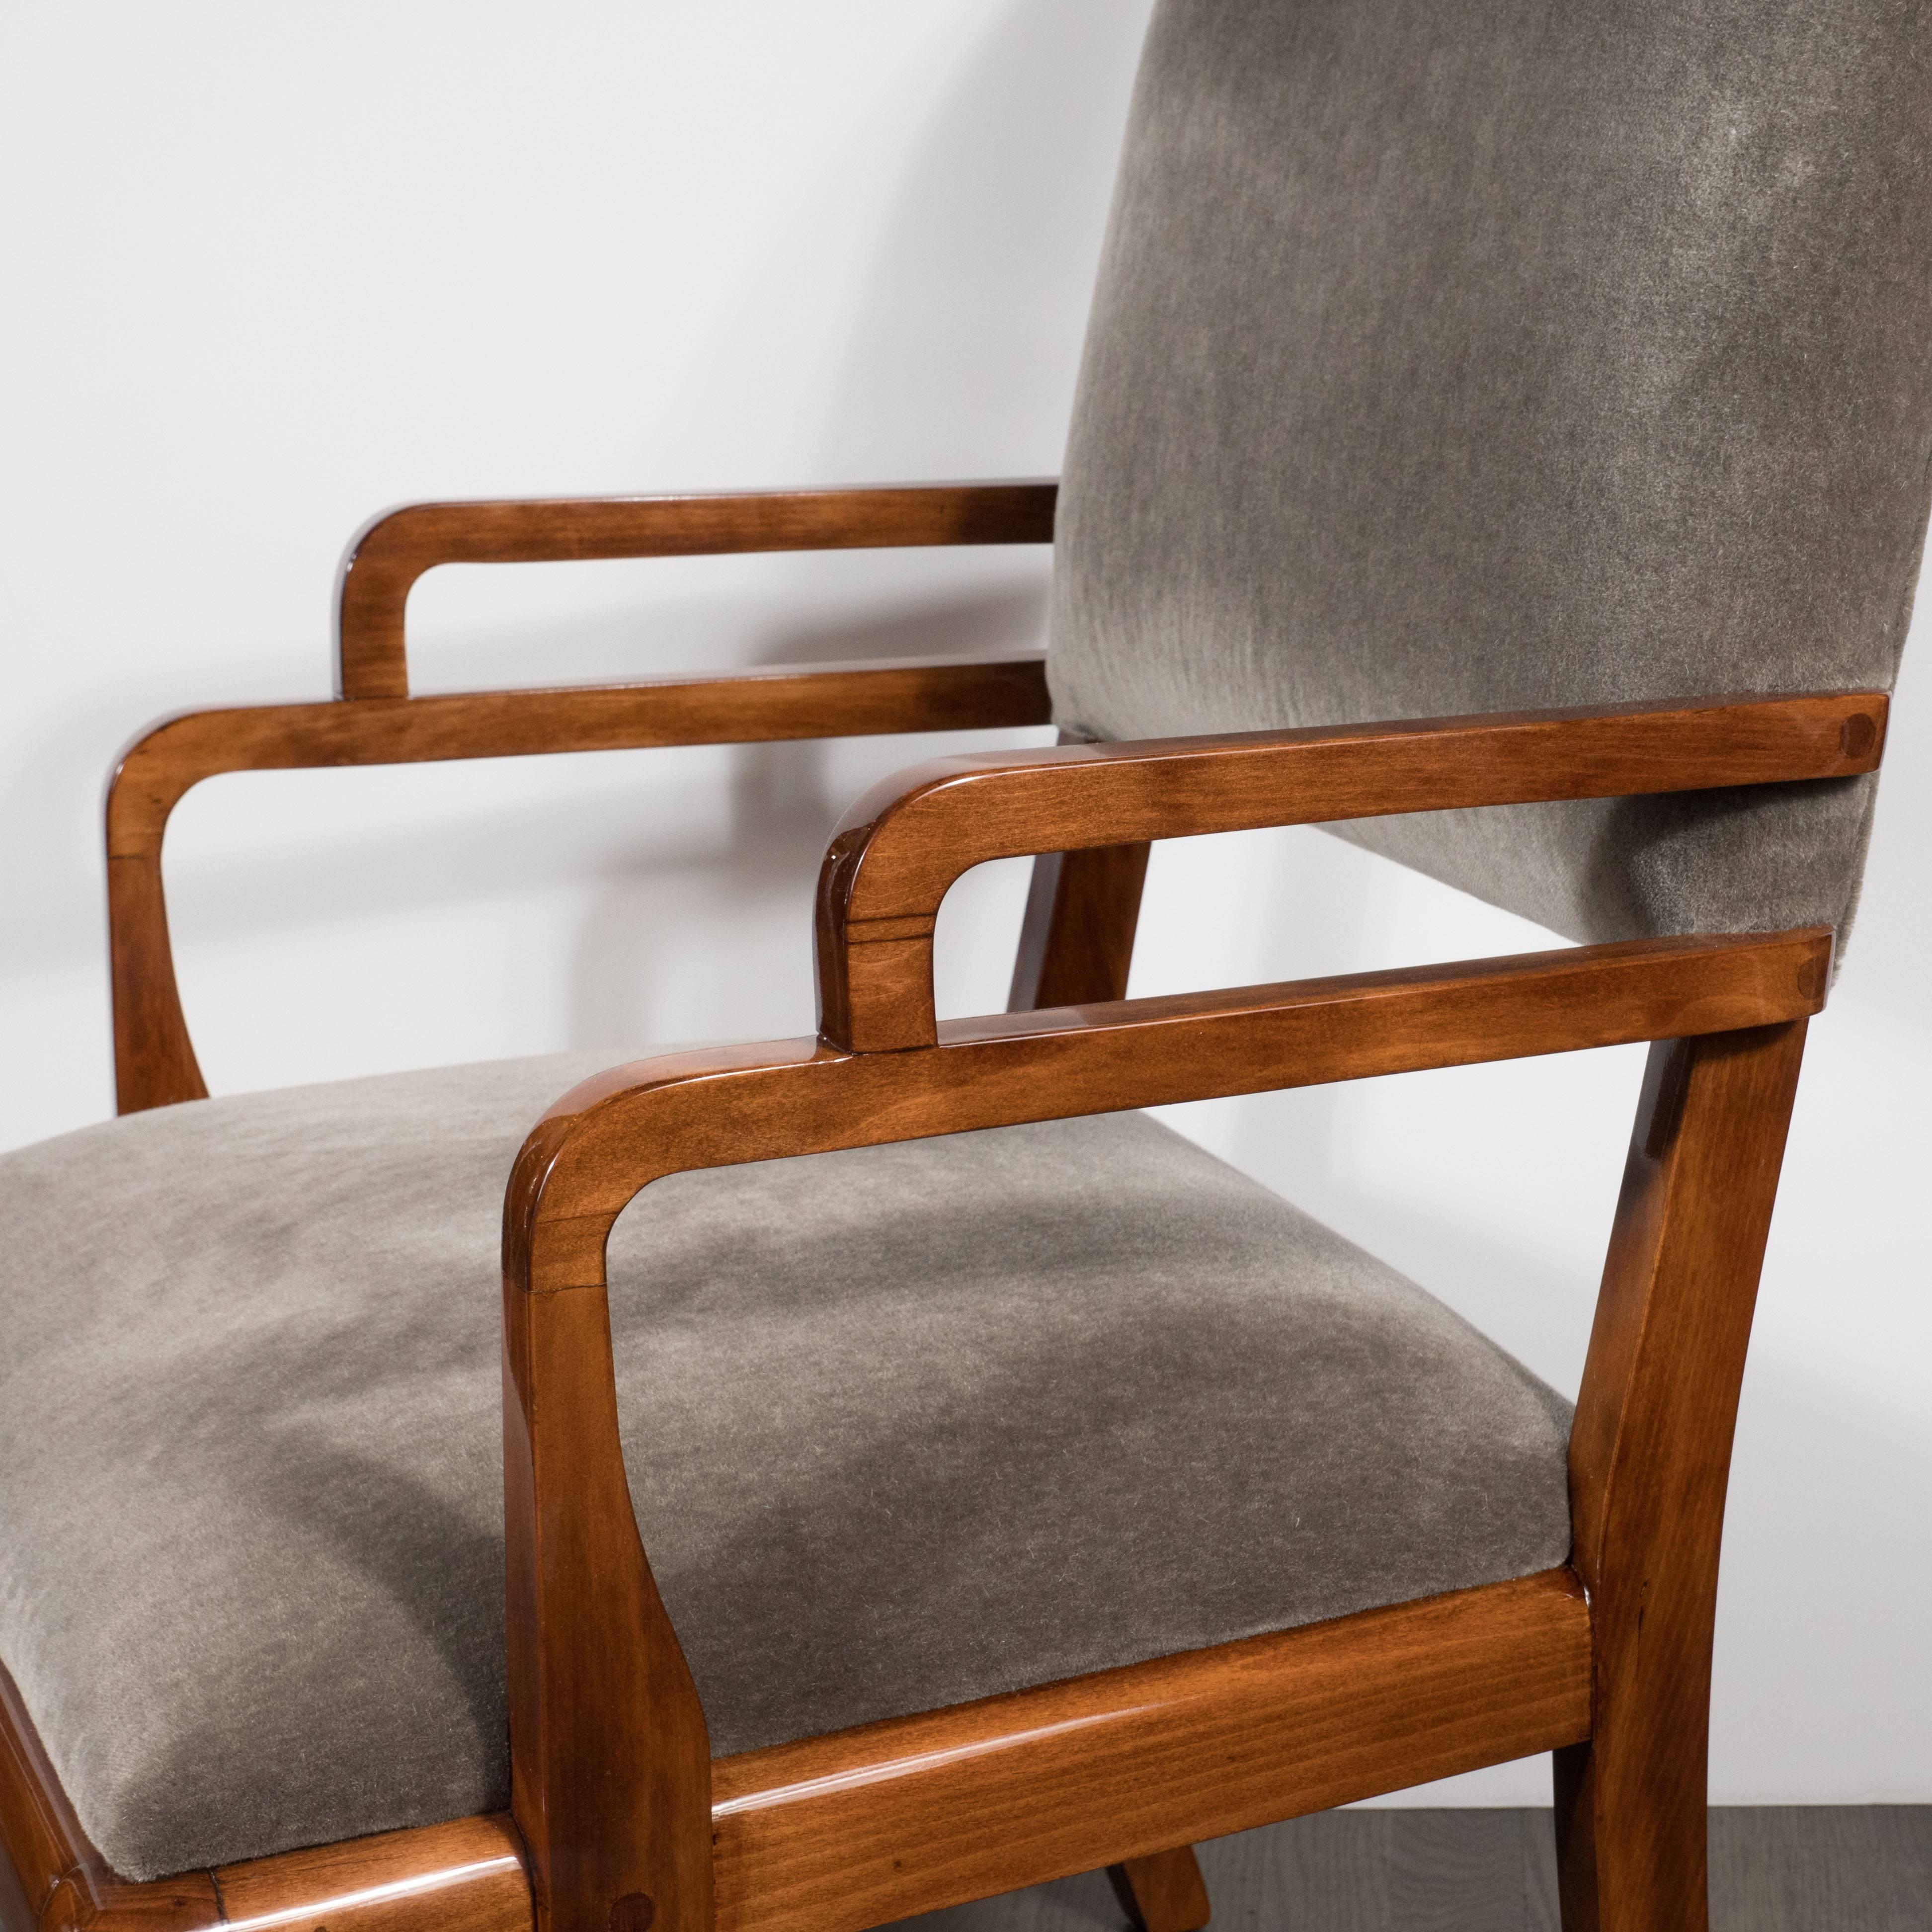 Mid-20th Century American Art Deco Streamlined Occasional Chair in Walnut and Dove Grey Mohair